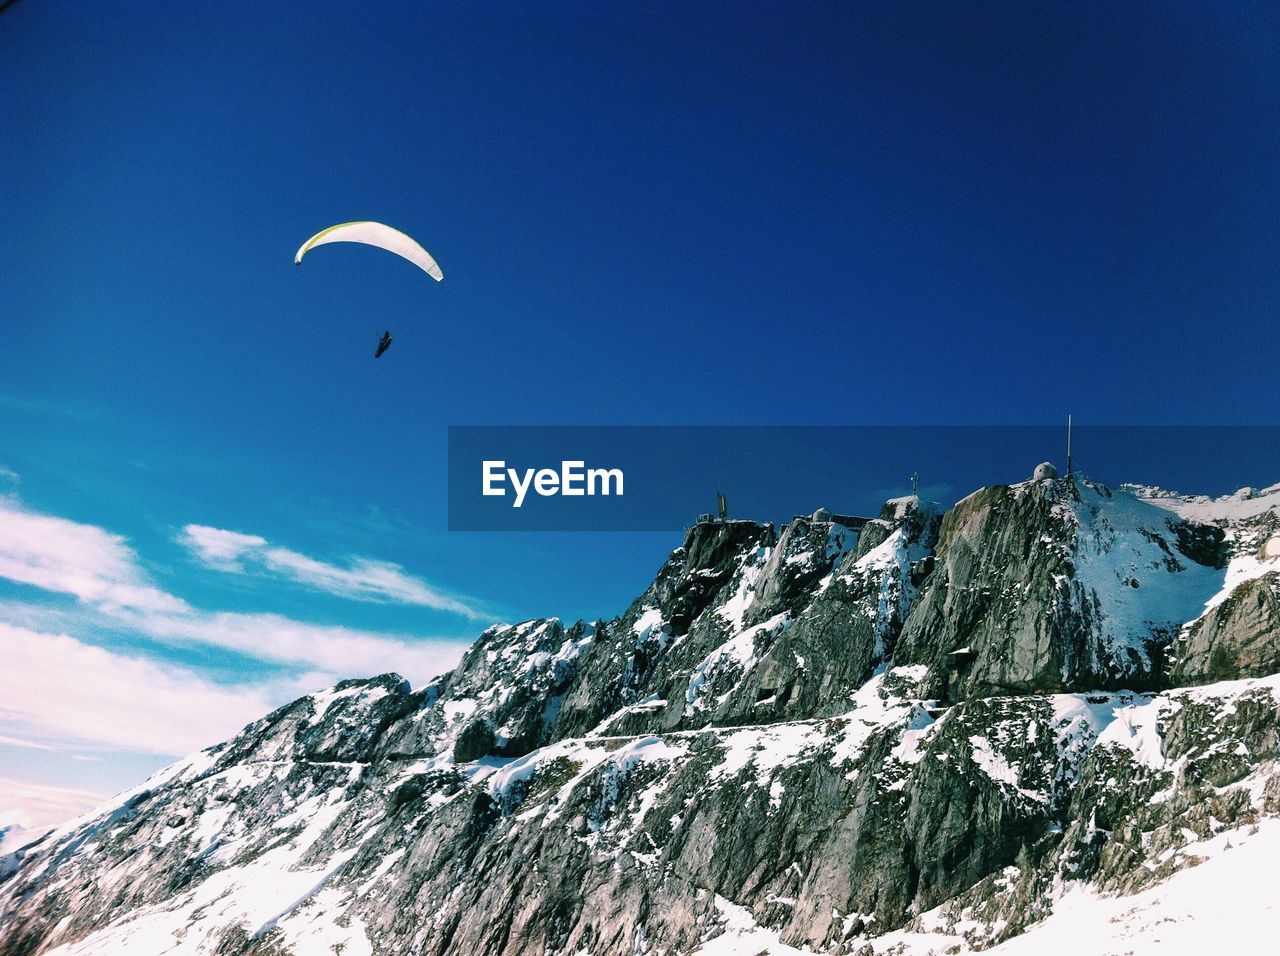 Person parasailing over snowcapped mountain